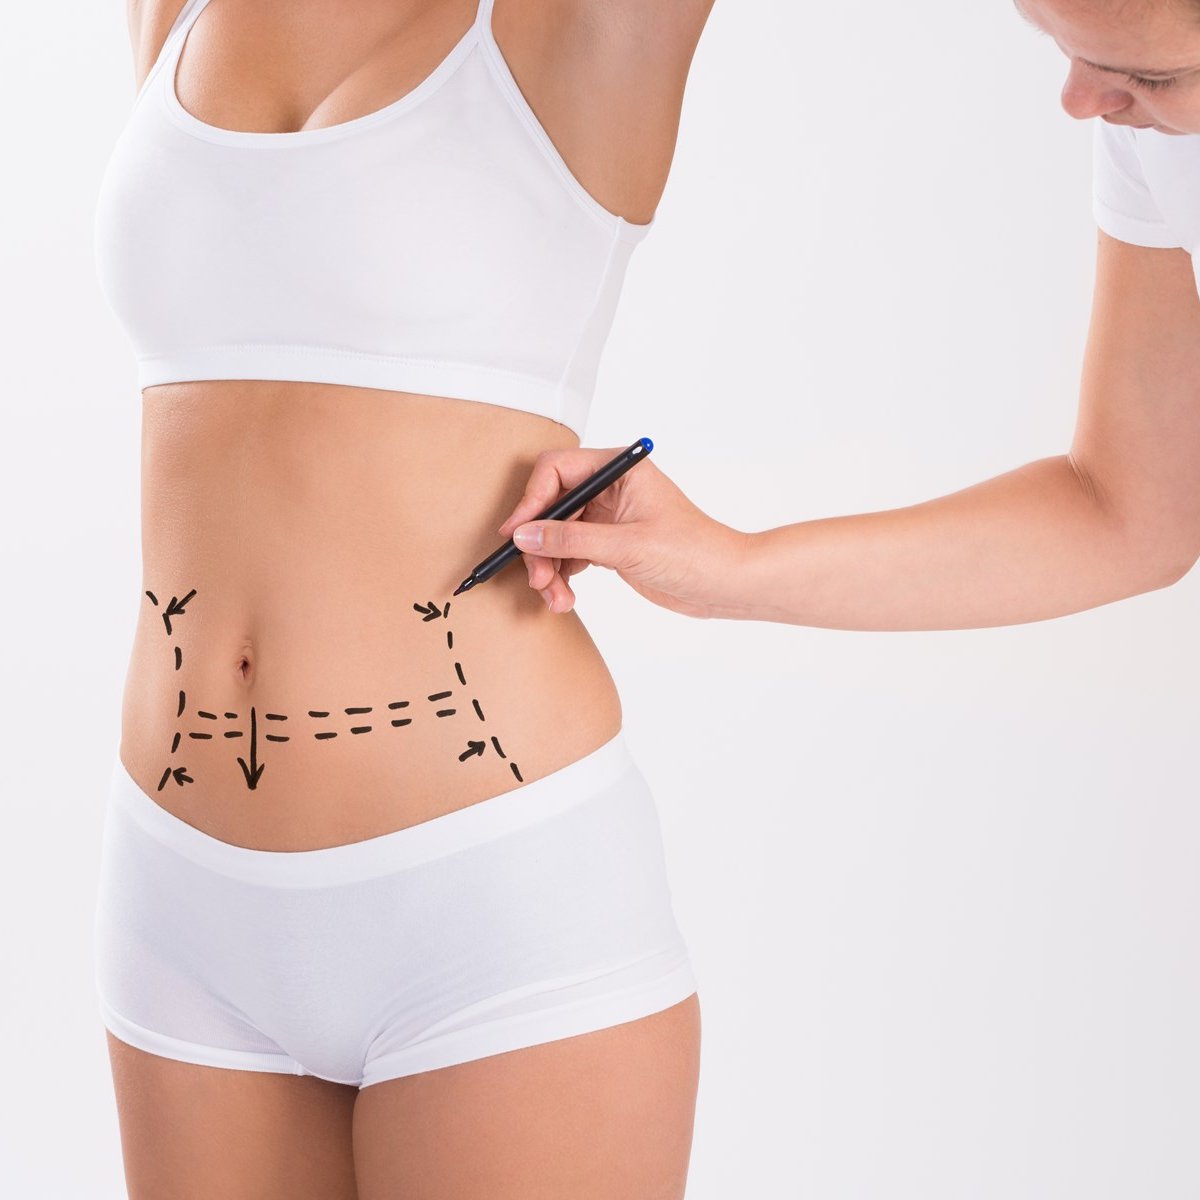 Read more about the article Lipotransfer